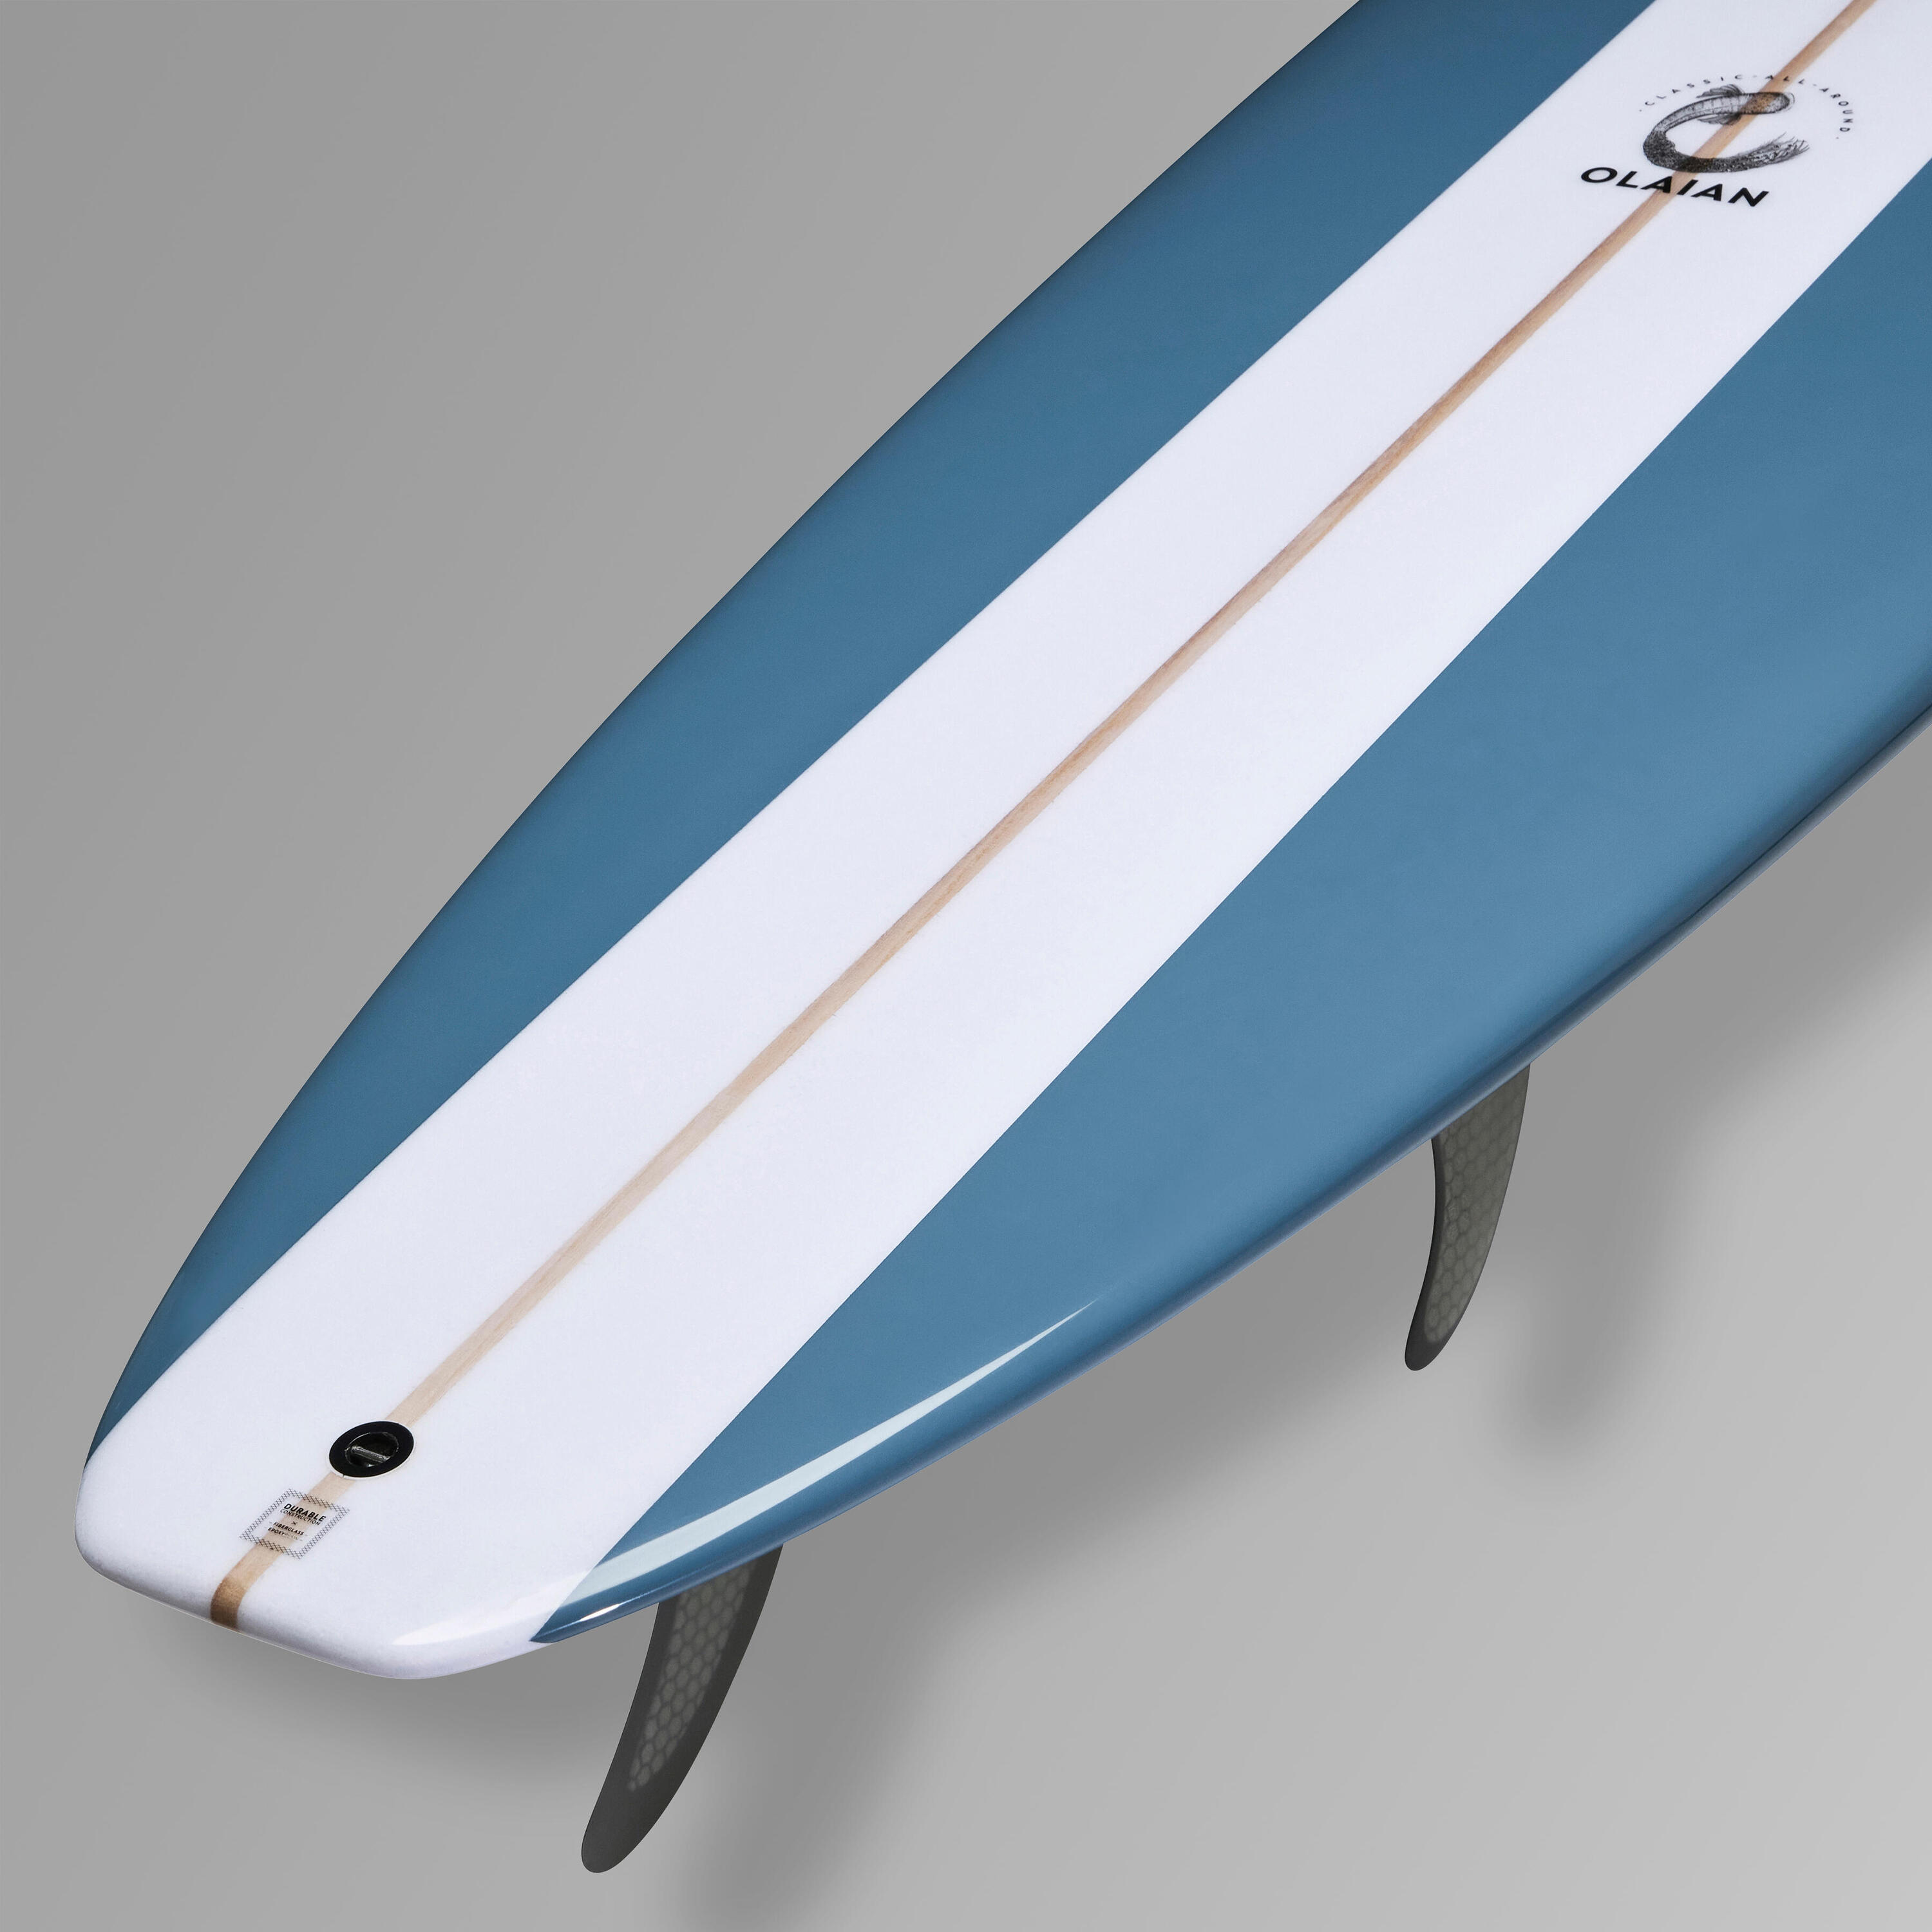 LONGBOARD 900 9' 67 L . Comes with 2+1 set-up 8" central fin. 7/14